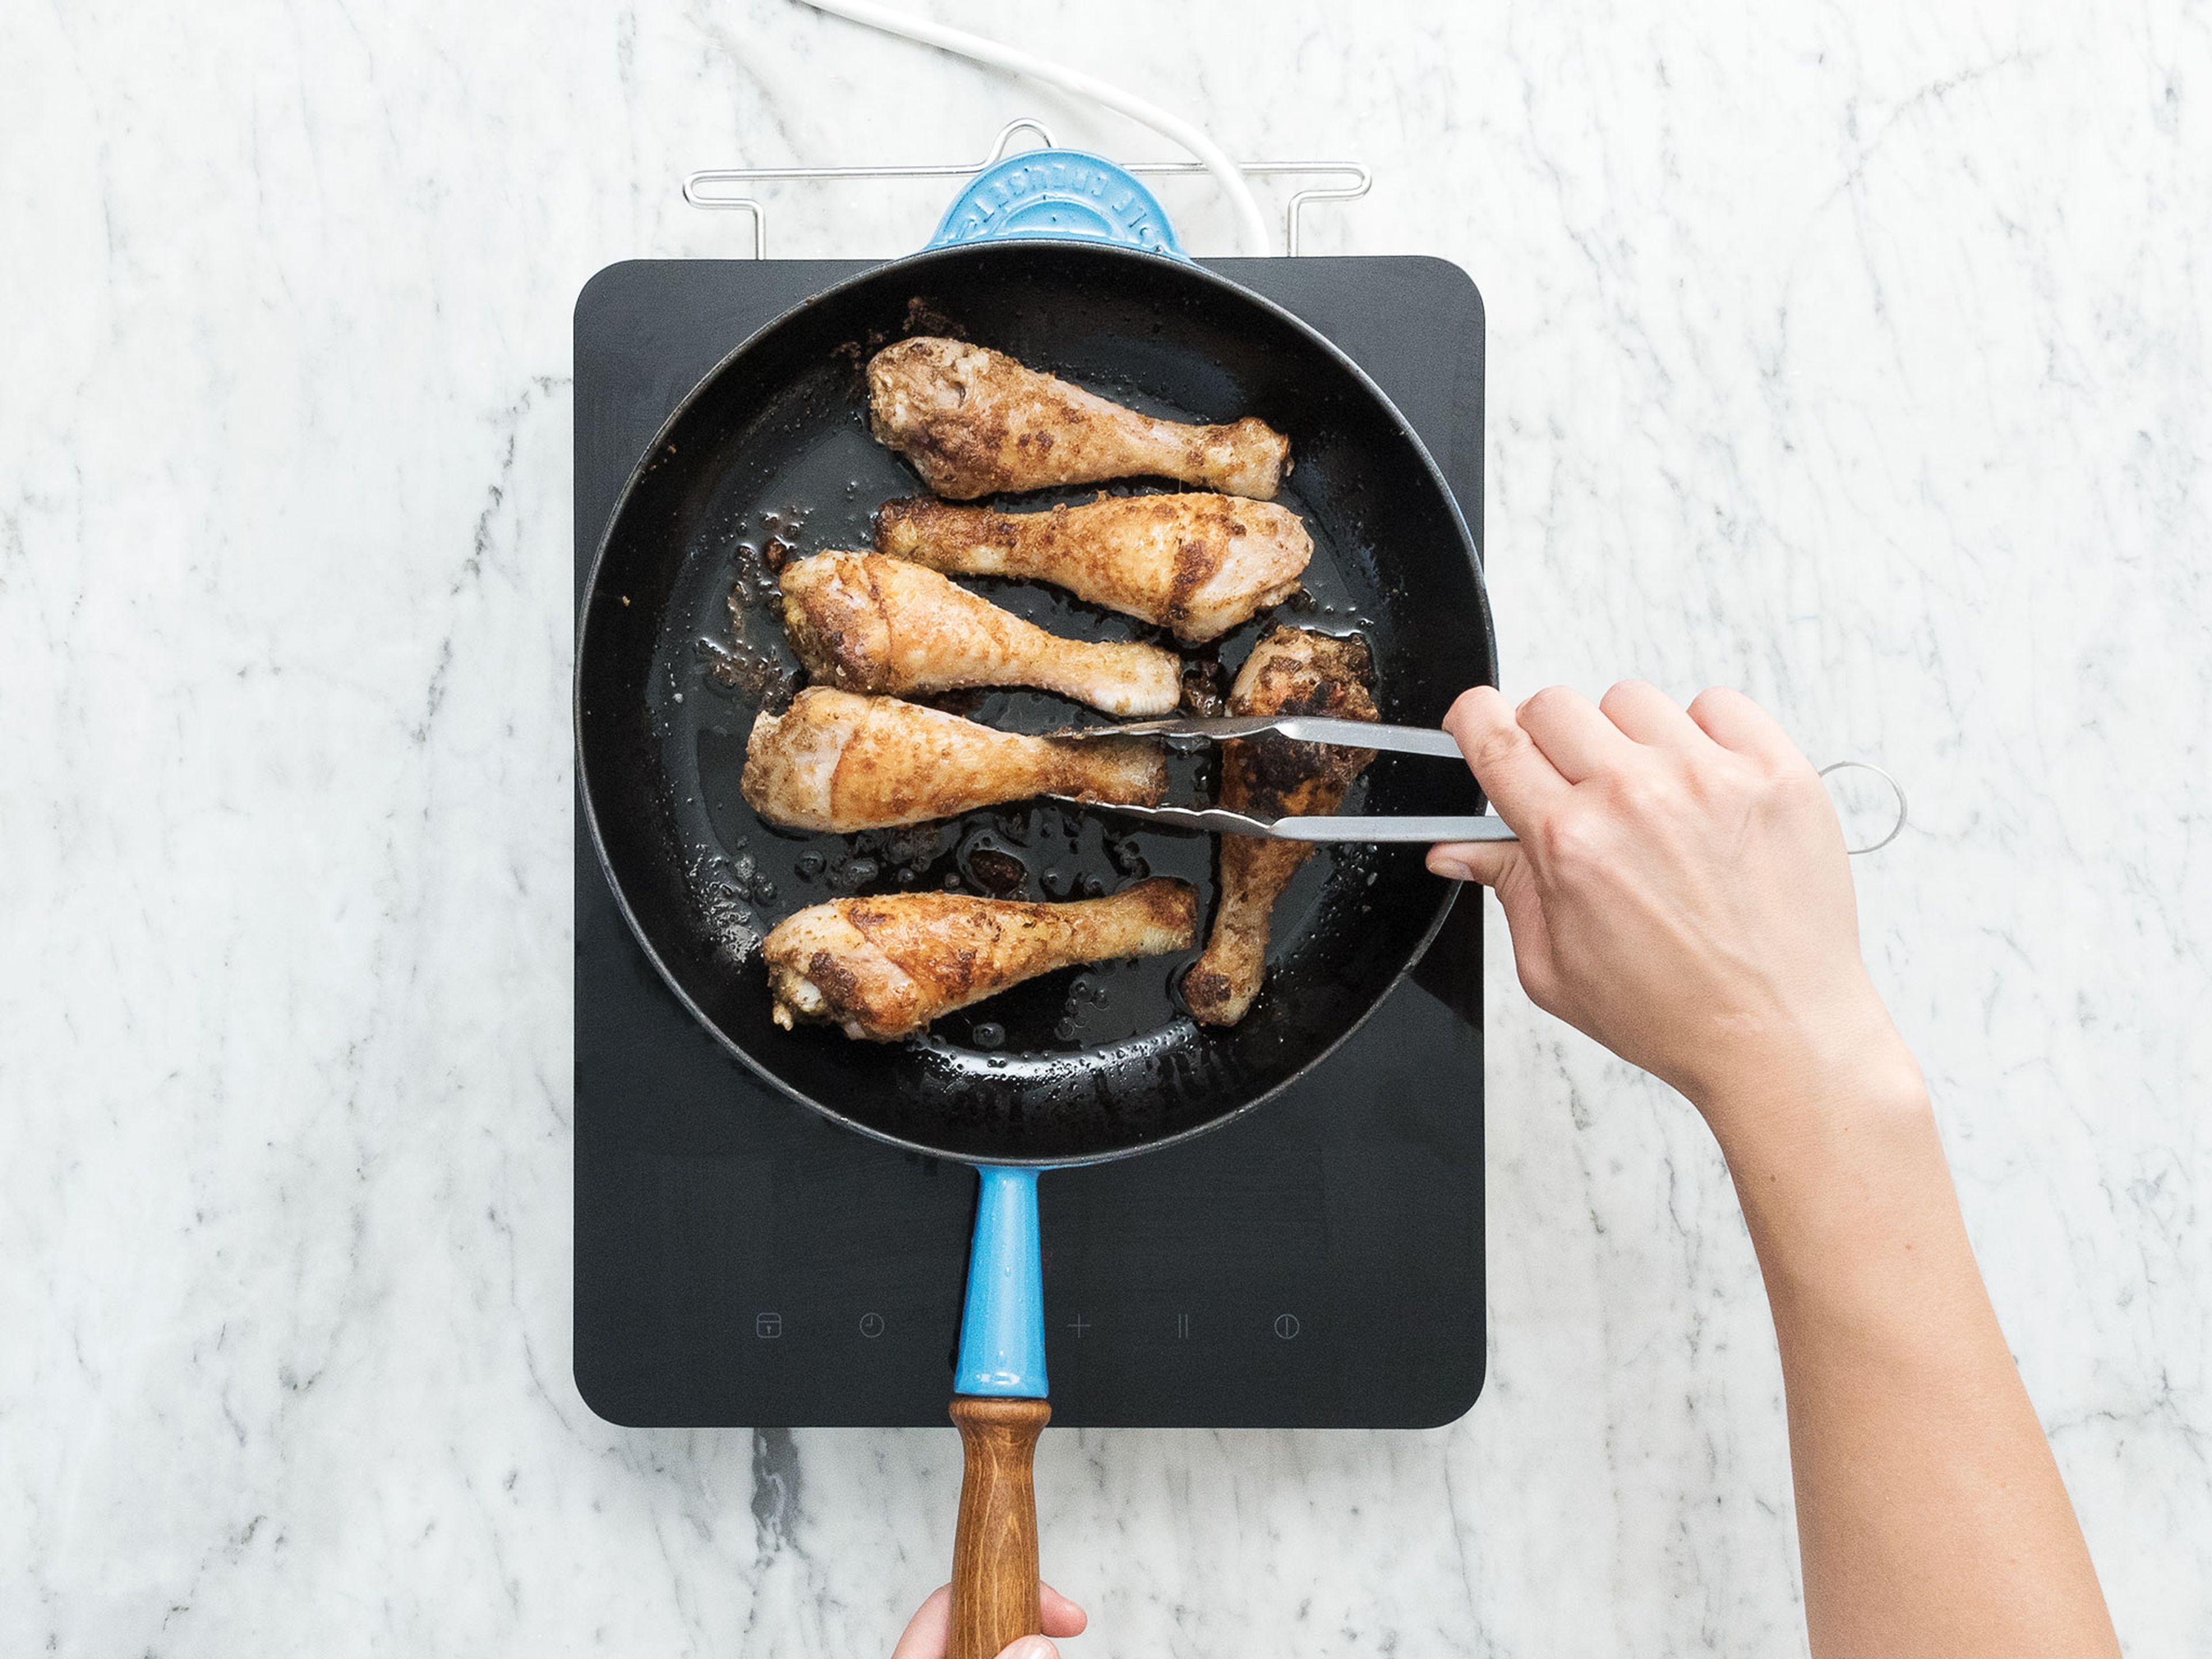 Remove chicken legs from marinade and toss in starch until covered. Heat oil in a frying pan and fry chicken legs on high heat for approx. 6 – 8 min. until crispy. Remove and degrease on paper towels.